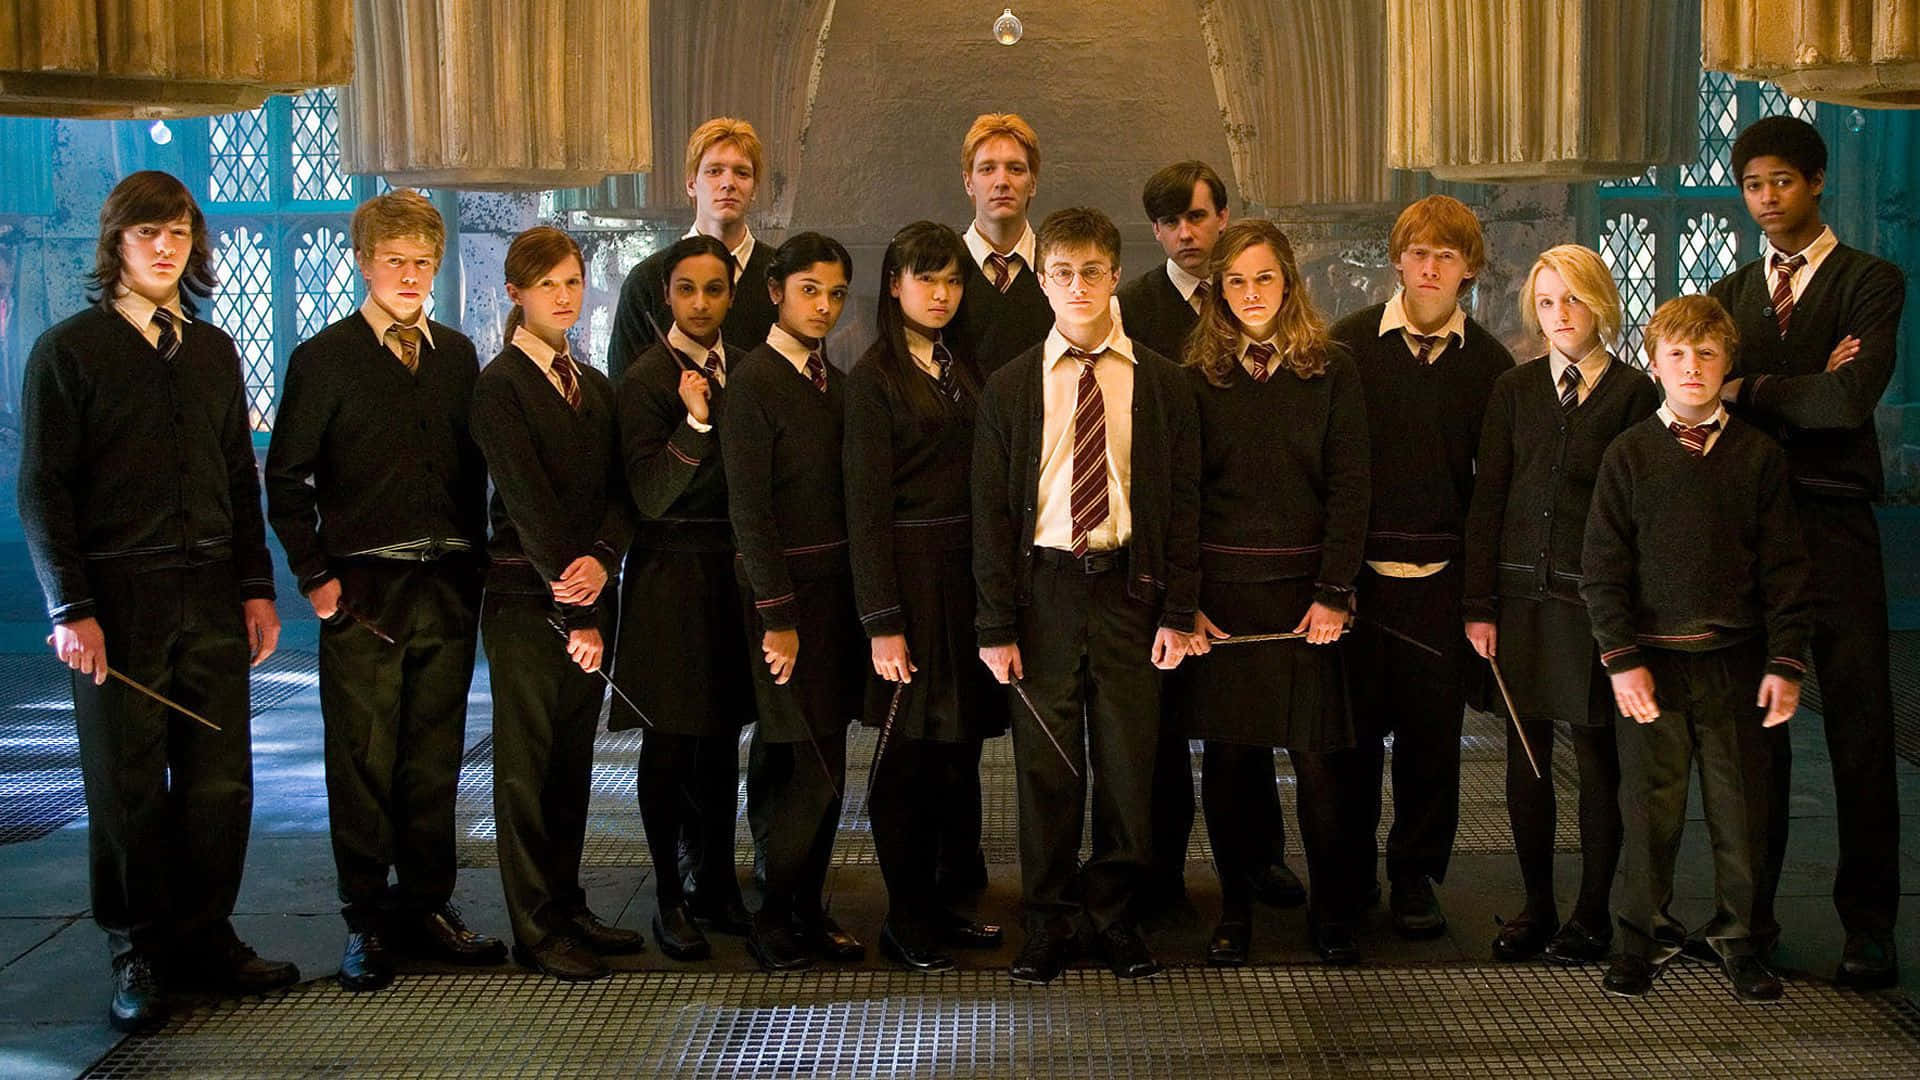 Members of Dumbledore's Army at Hogwarts School of Witchcraft and Wizardry Wallpaper